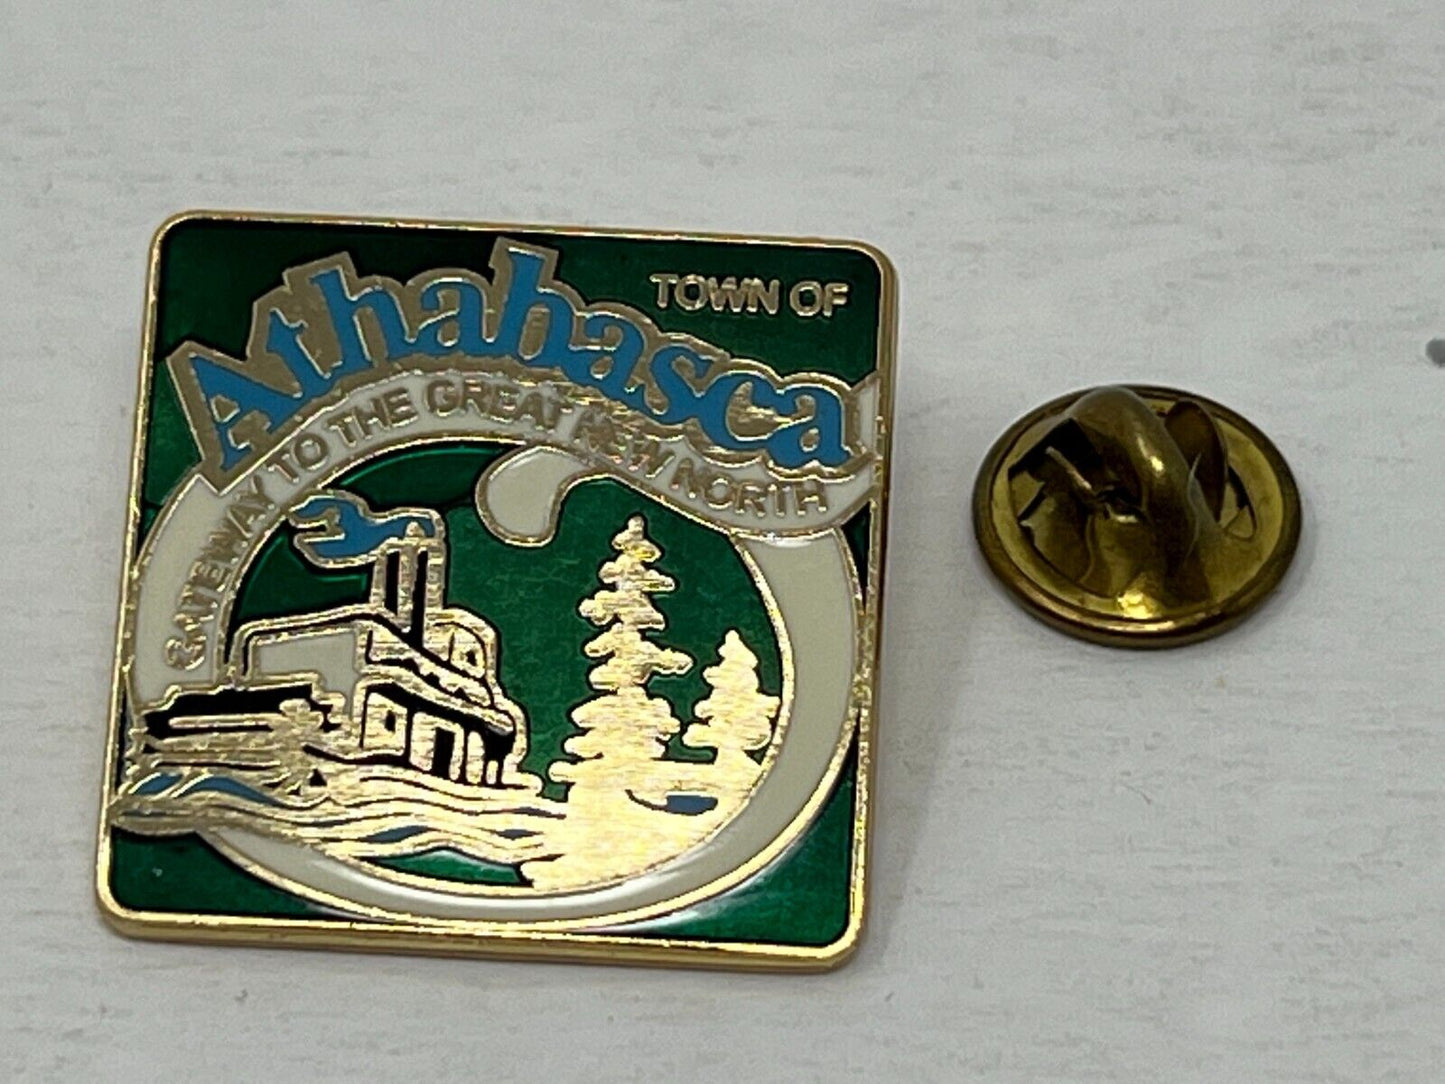 Town of Athabasca Gateway to the Great New North Cities & States Lapel Pin